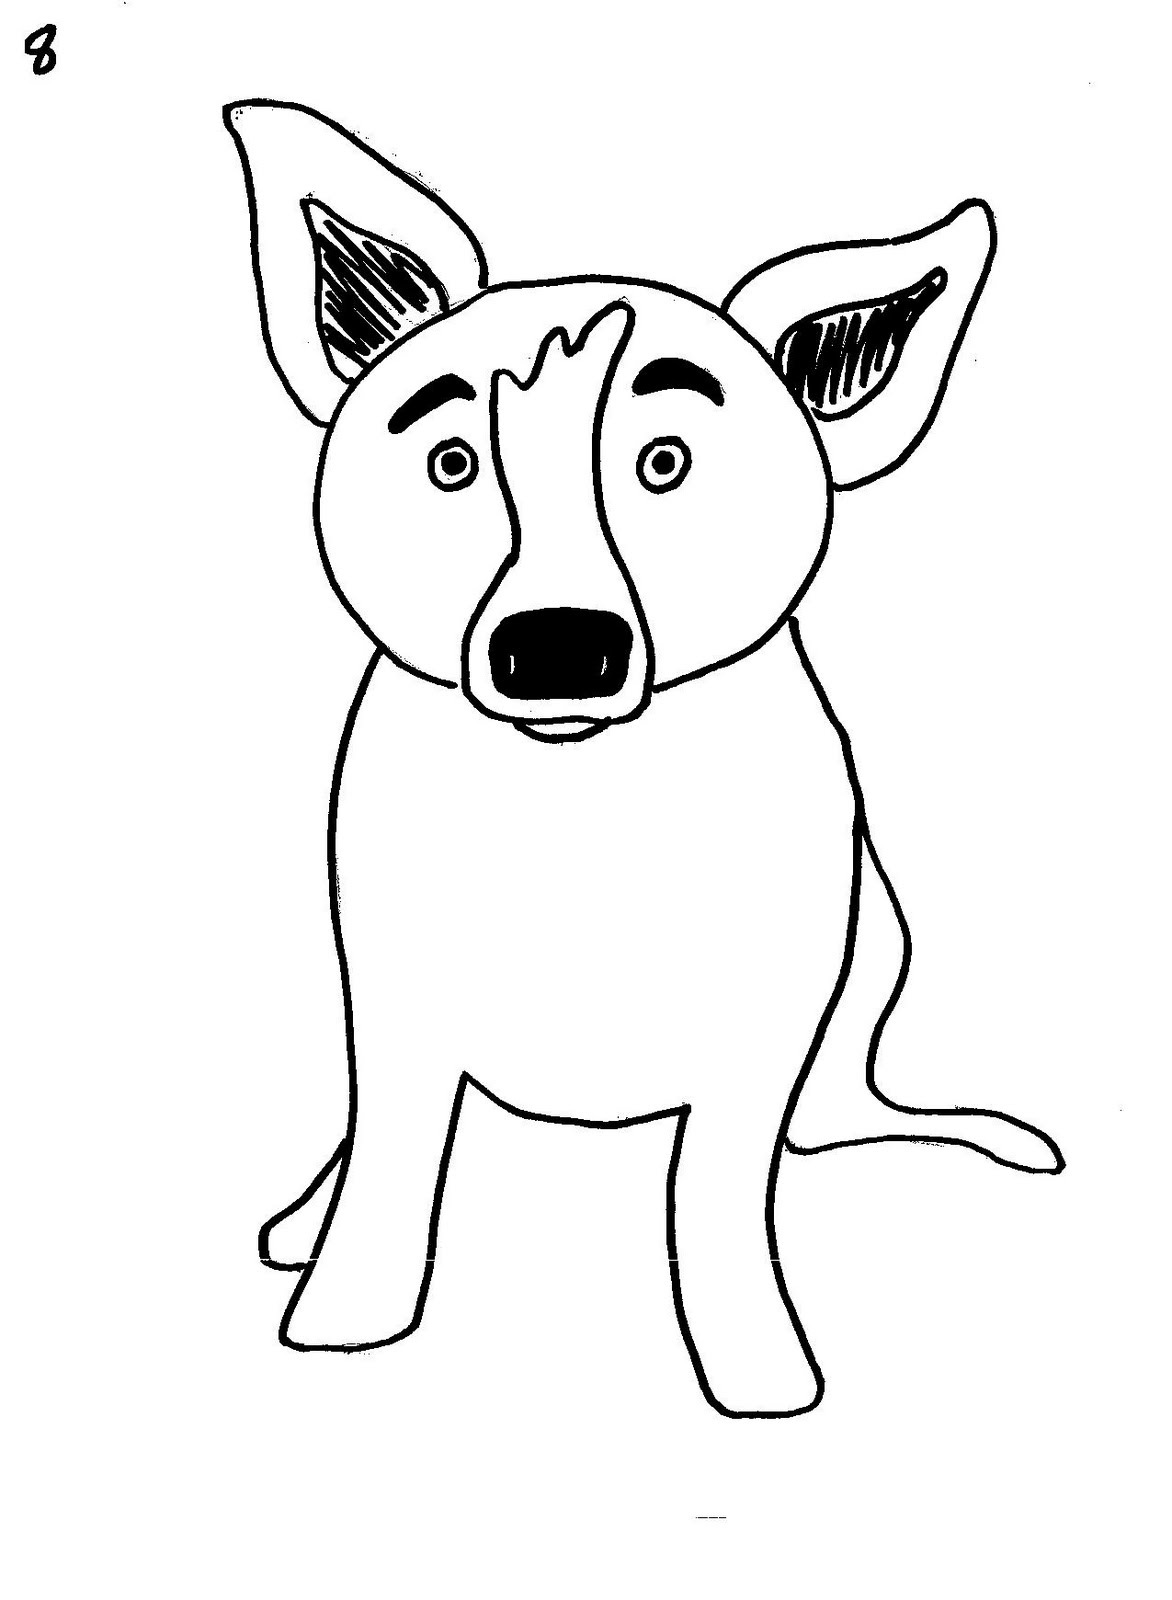 Blue Dog Fun : How to Draw Blue Dog - ClipArt Best - ClipArt Best